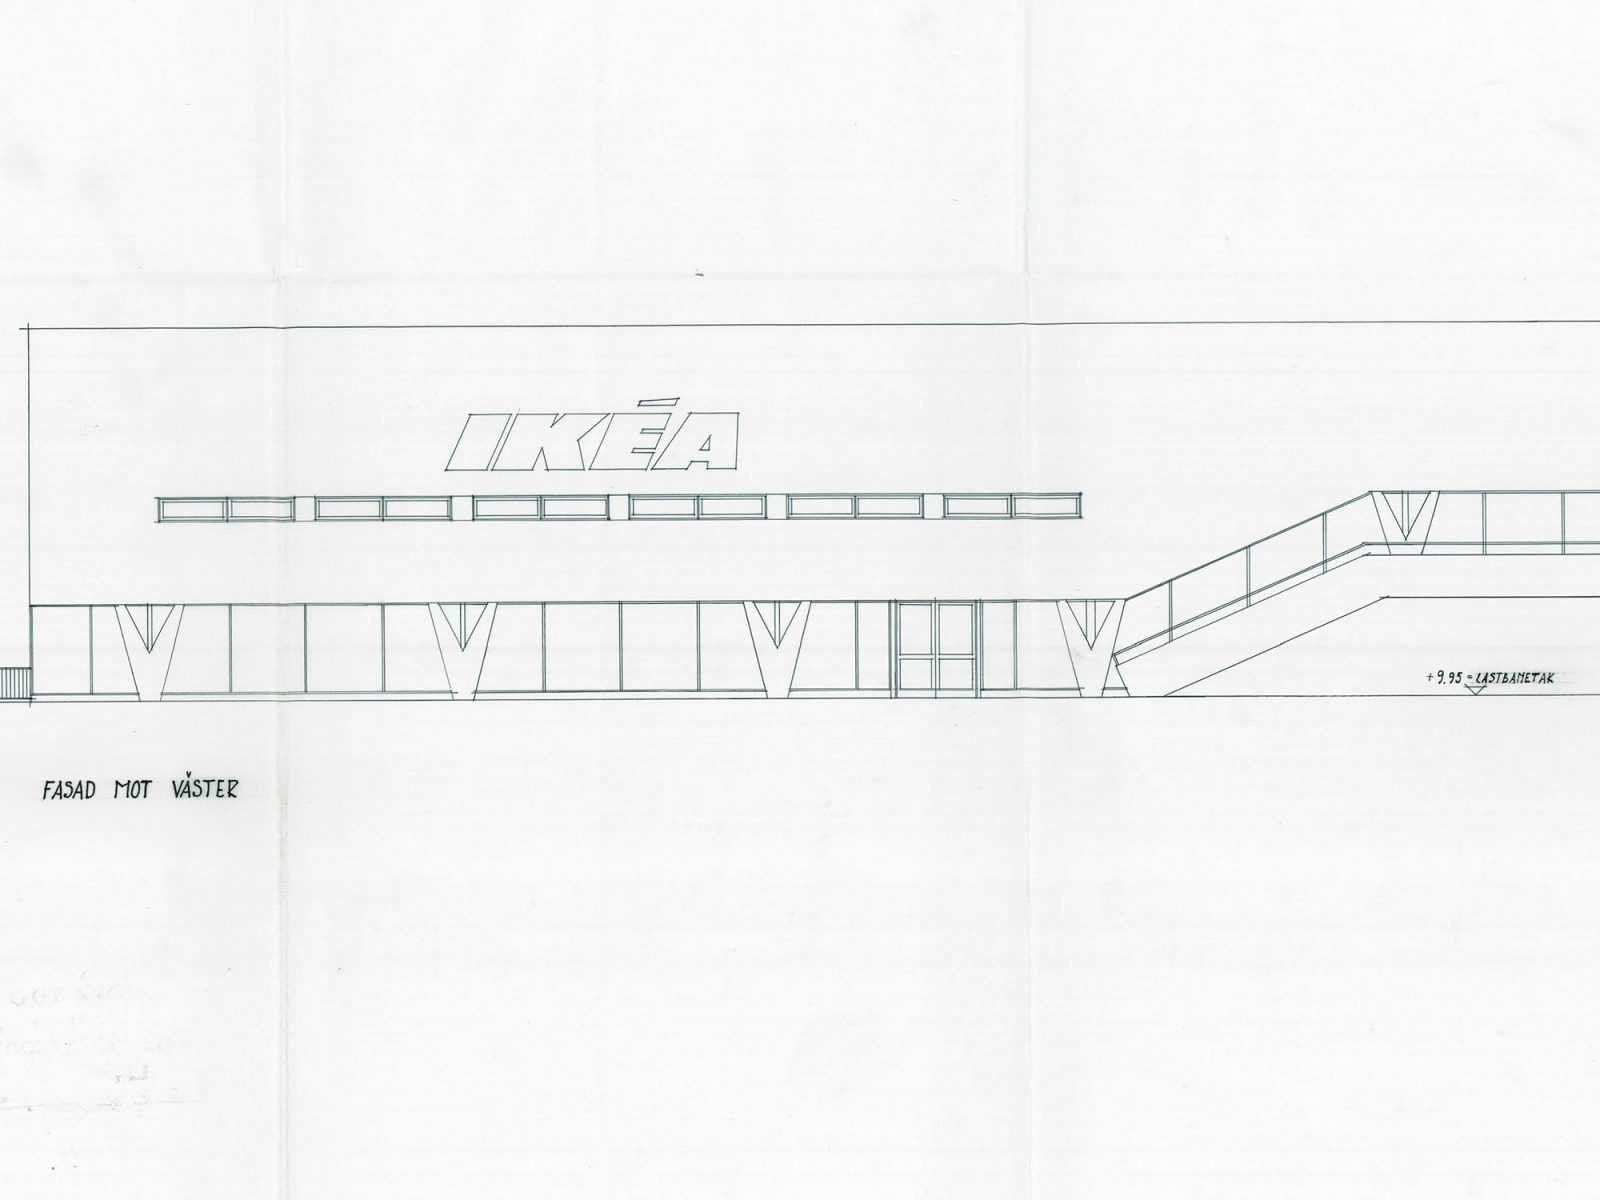 Architectural drawing of low building with archade with large shop windows, V-shaped columns, an IKEA sign on facade.